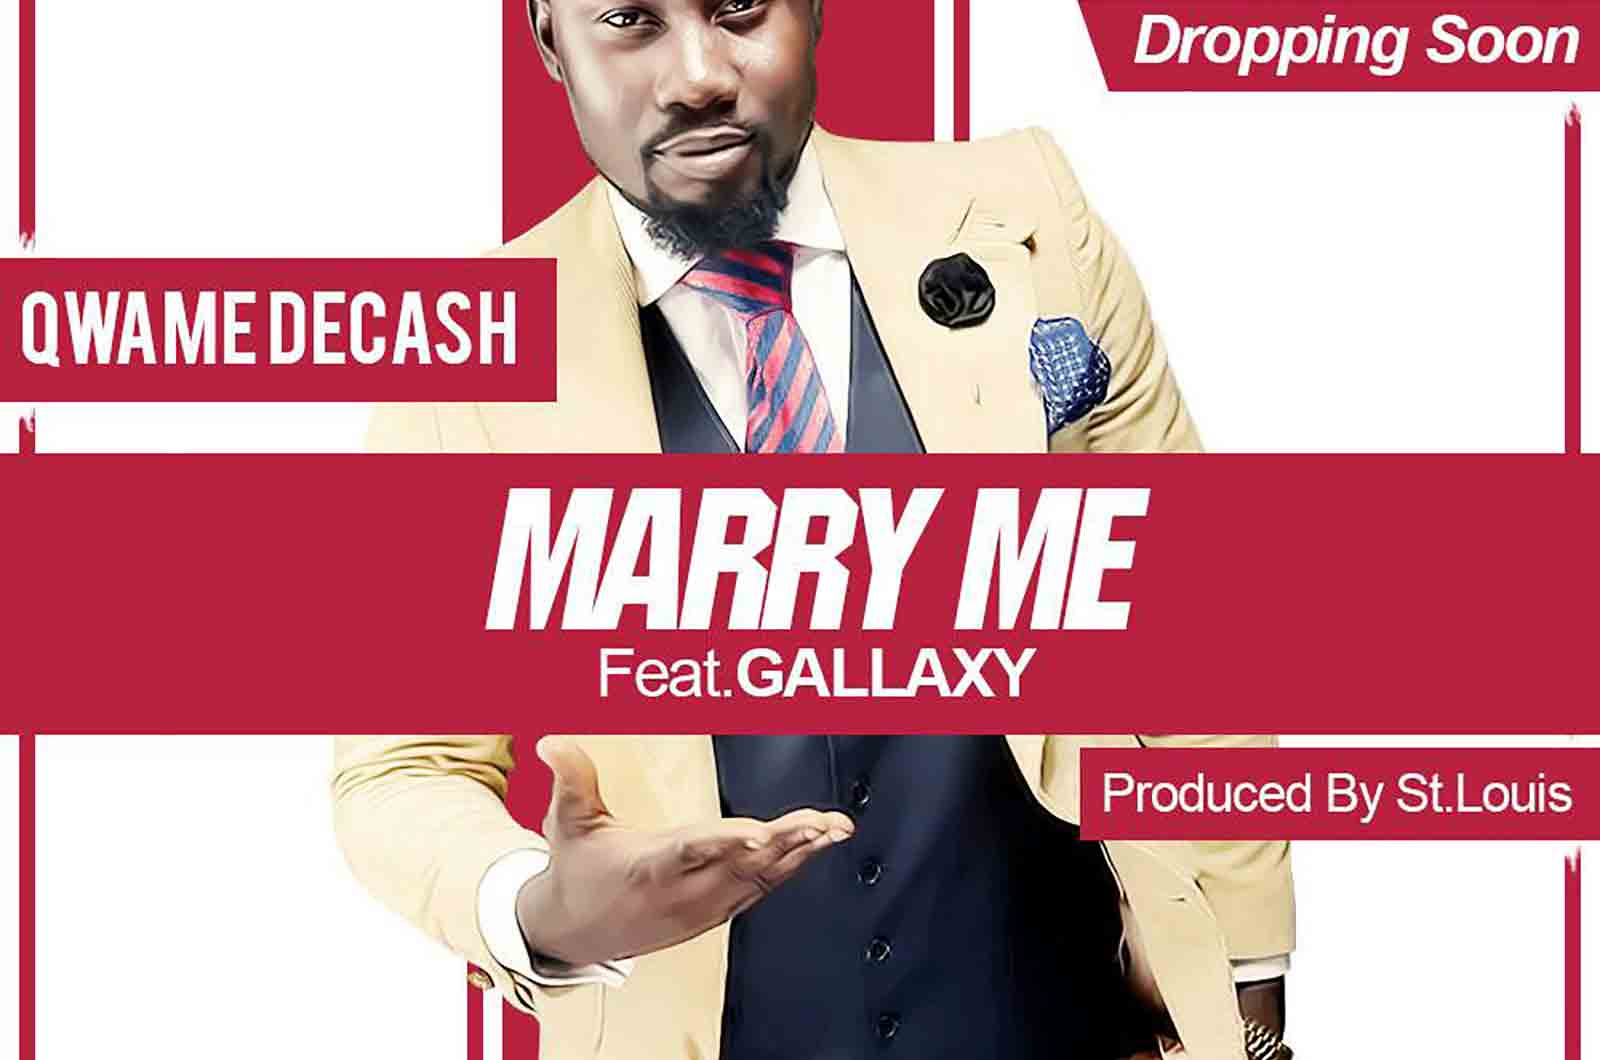 Qwame DeCash - Marry Me